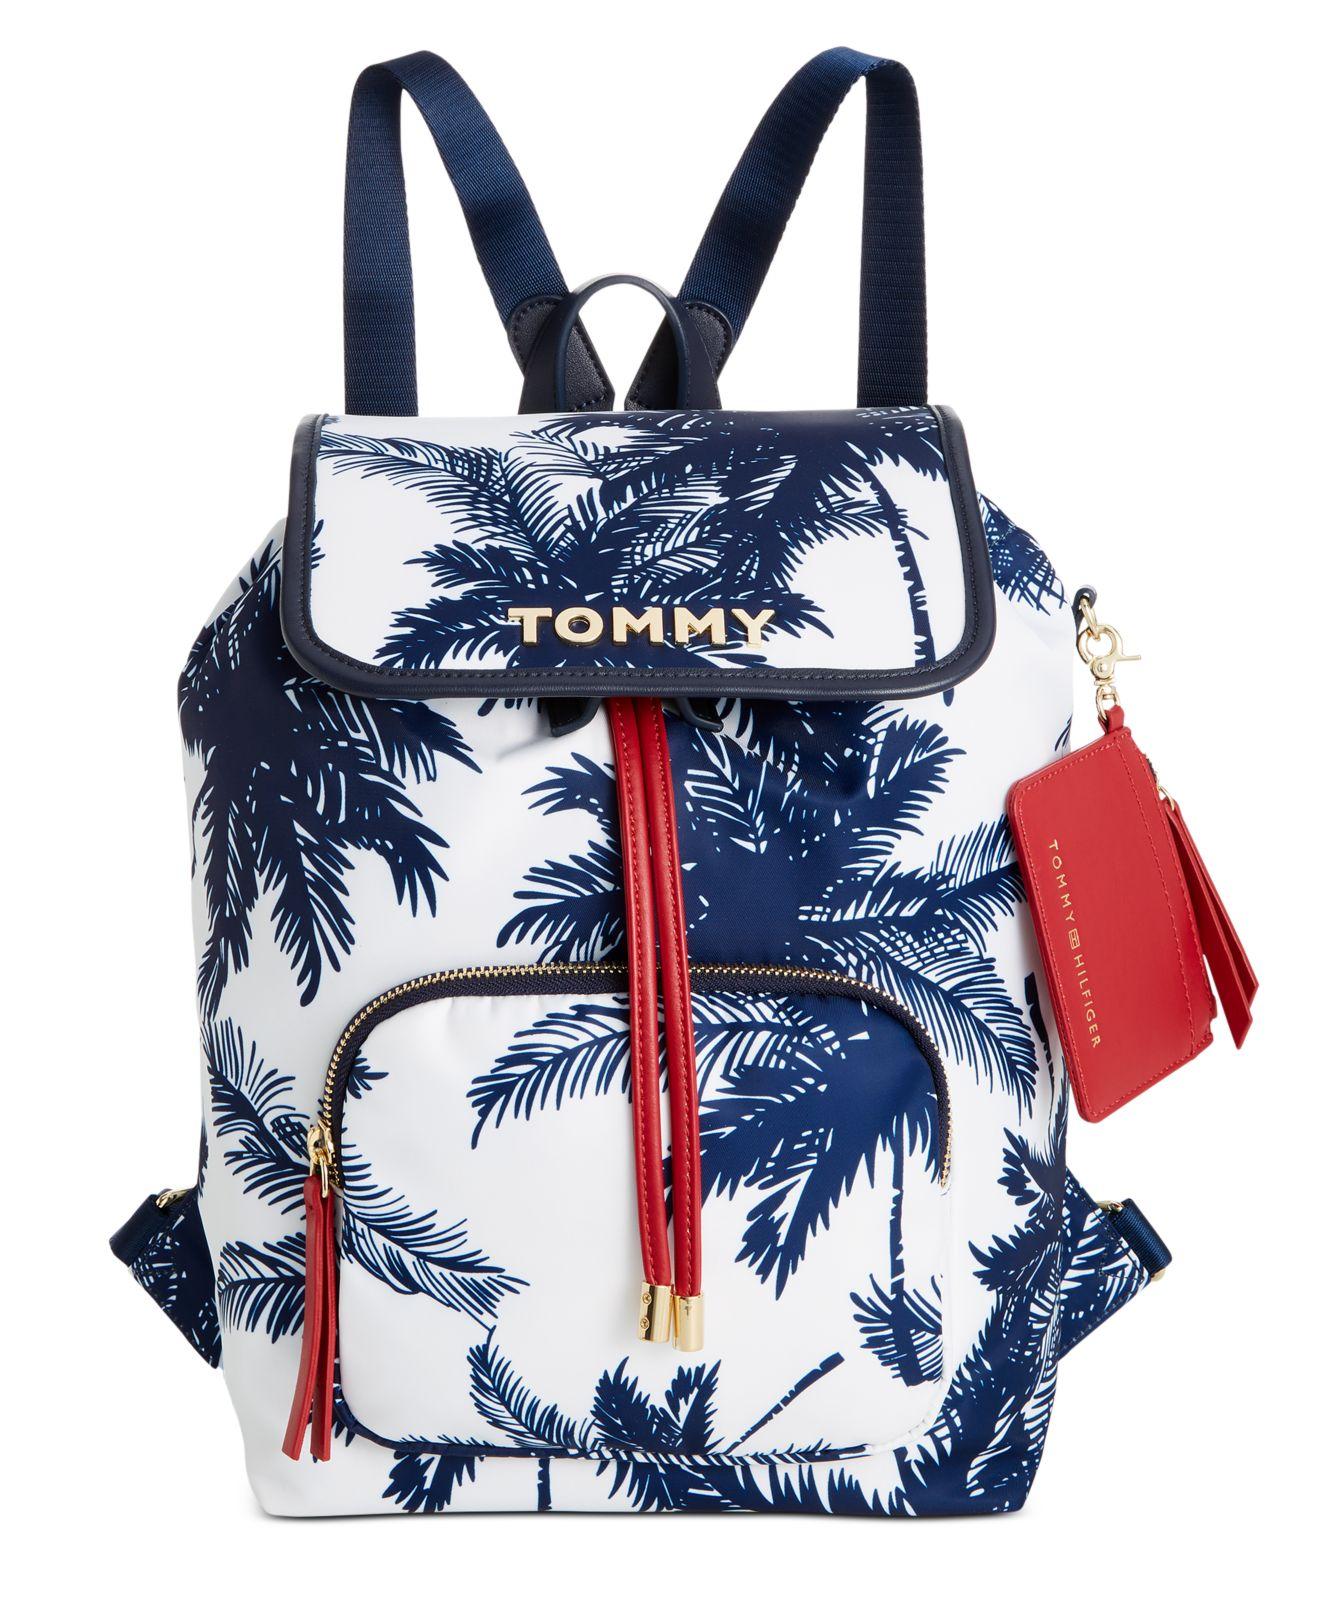 Tommy Hilfiger Synthetic Tammy Recycled Nylon Backpack in Navy/White (Blue)  - Lyst